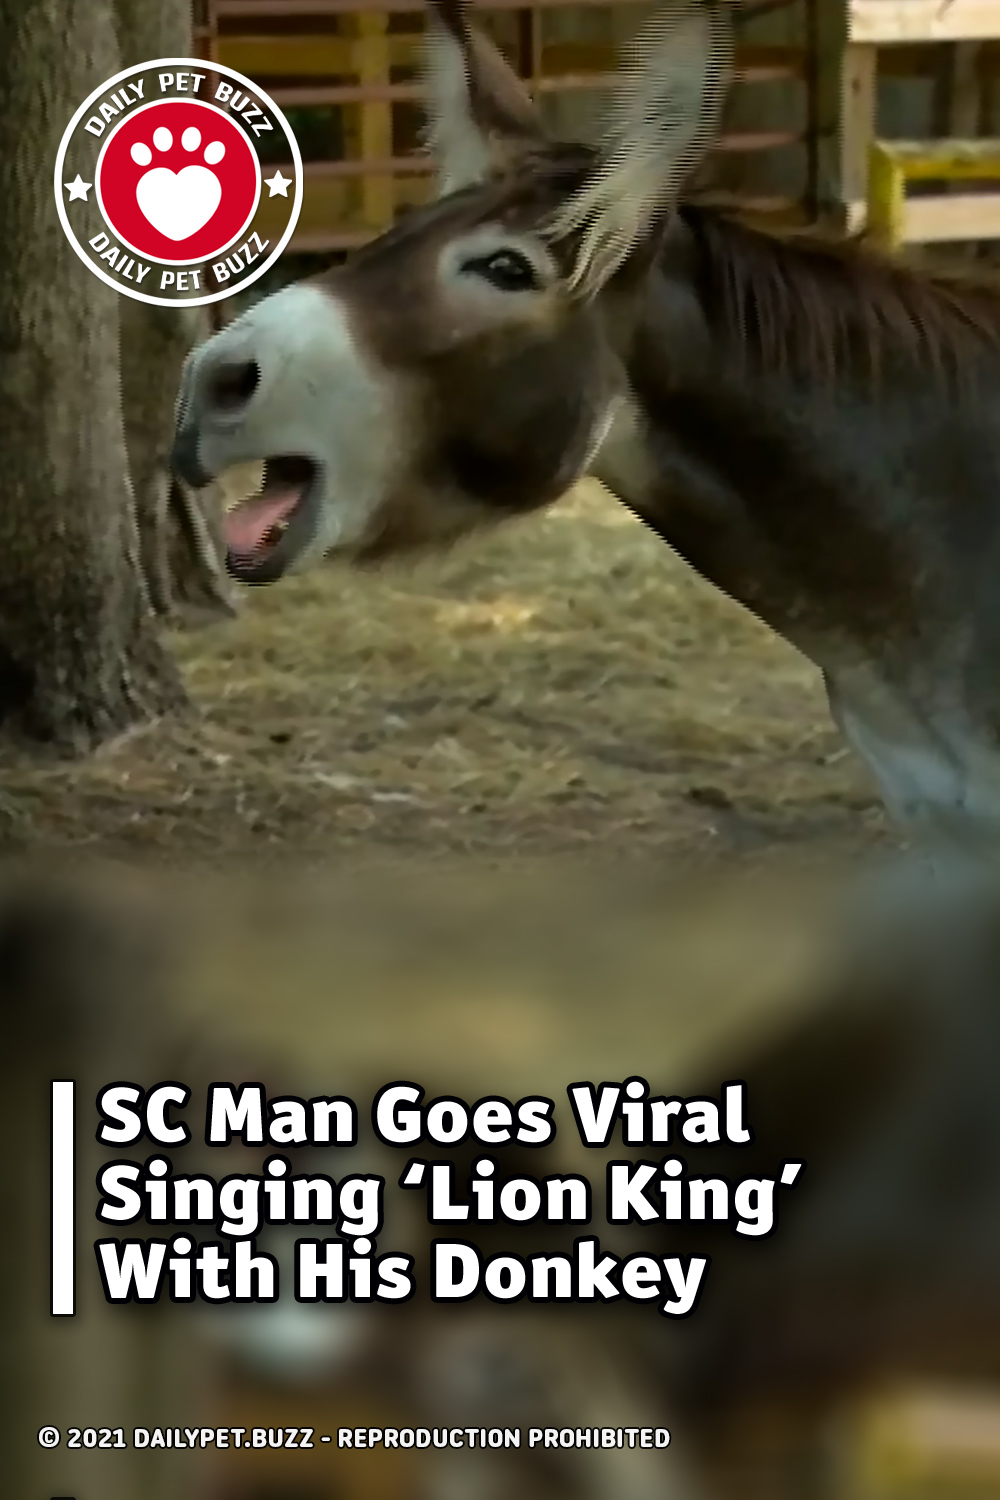 SC Man Goes Viral Singing ‘Lion King’ With His Donkey